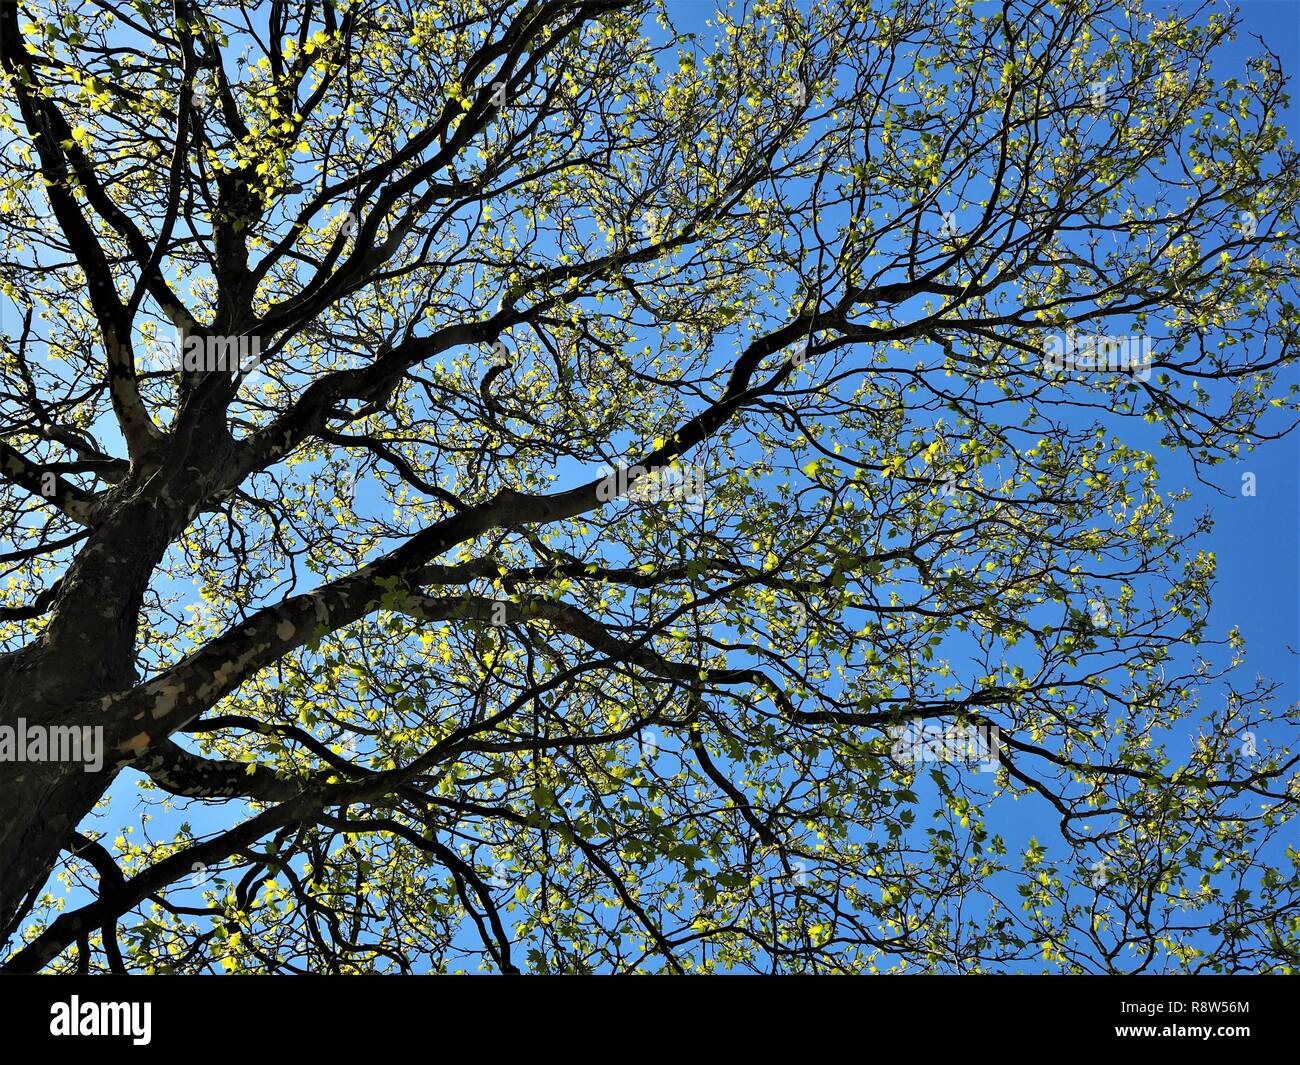 Looking up into a sycamore tree with fresh new green leaves in spring Stock Photo